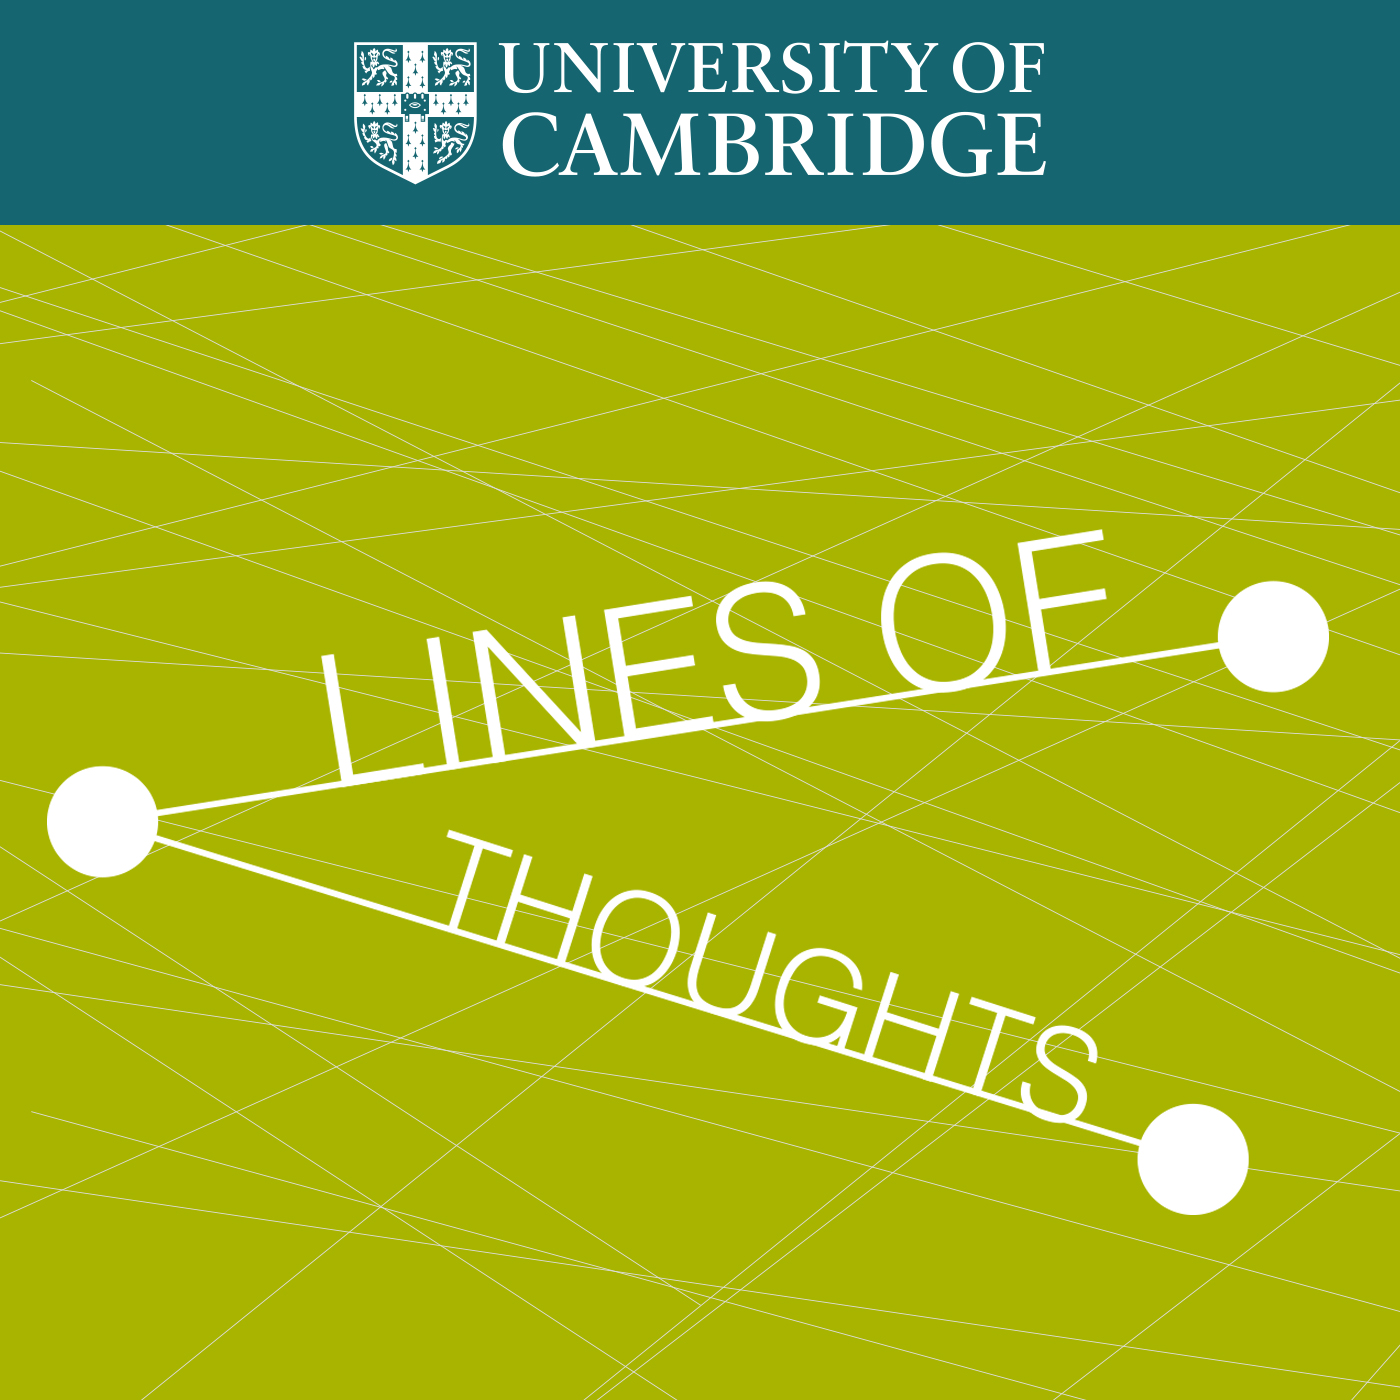 Lines of Thought: Discoveries that Changed the World's image